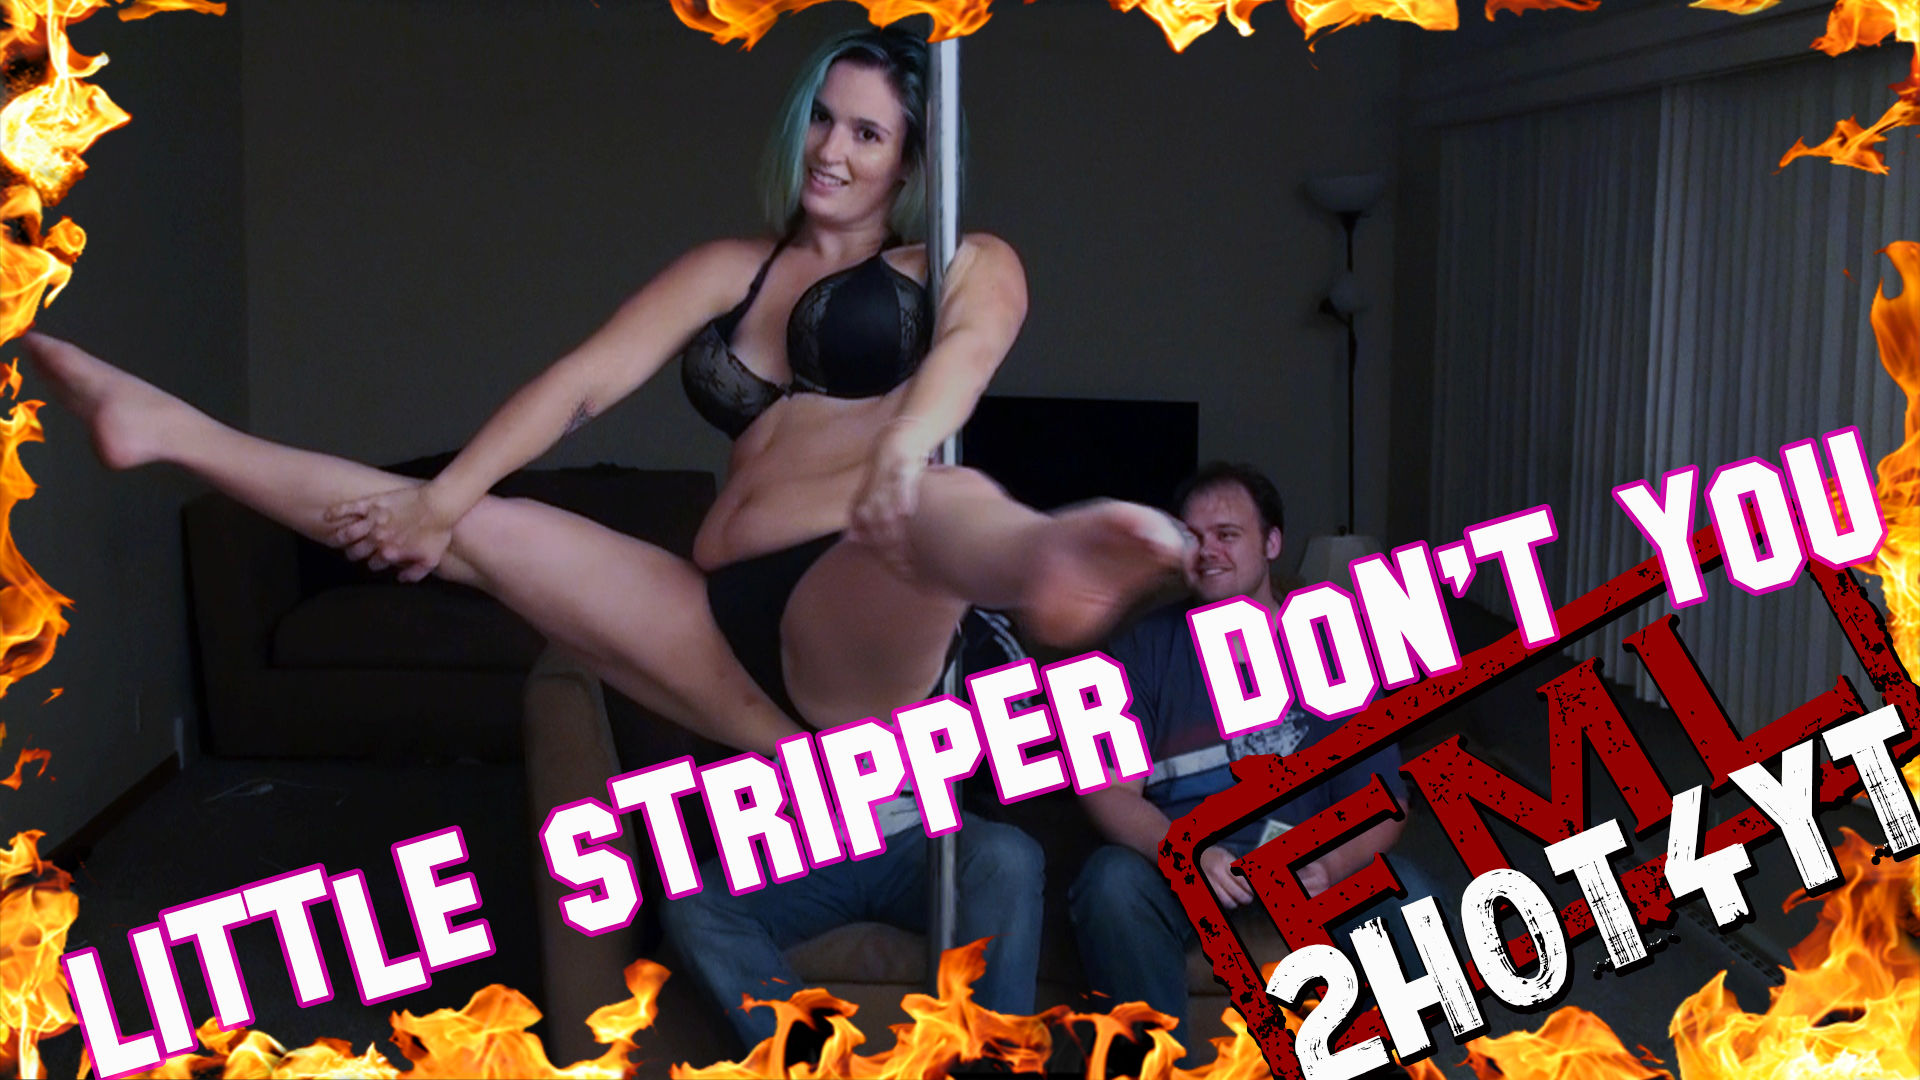 Little Stripper Don't You (Remastered)